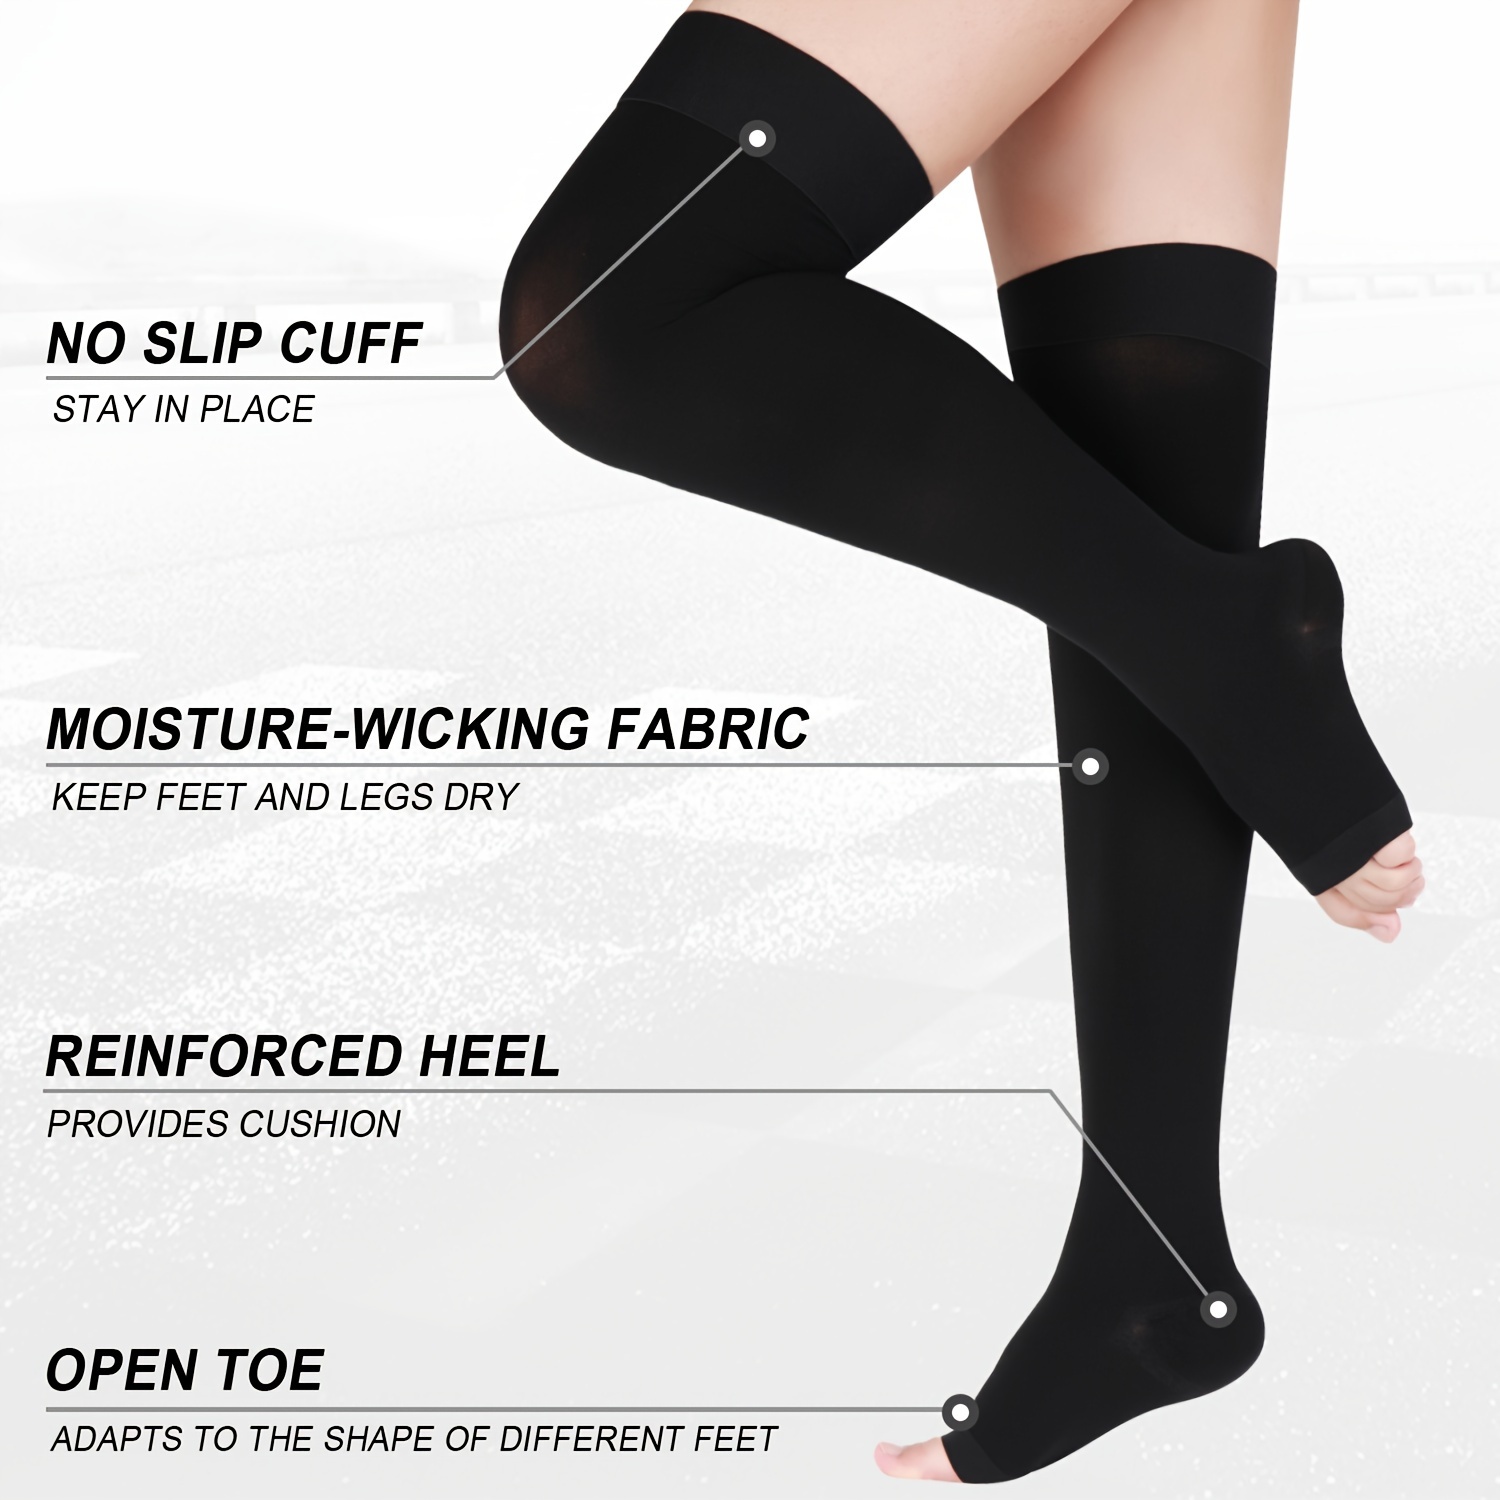 TED Knee High Open Toe Anti-Embolism Compression Stockings – Shaped Curvy